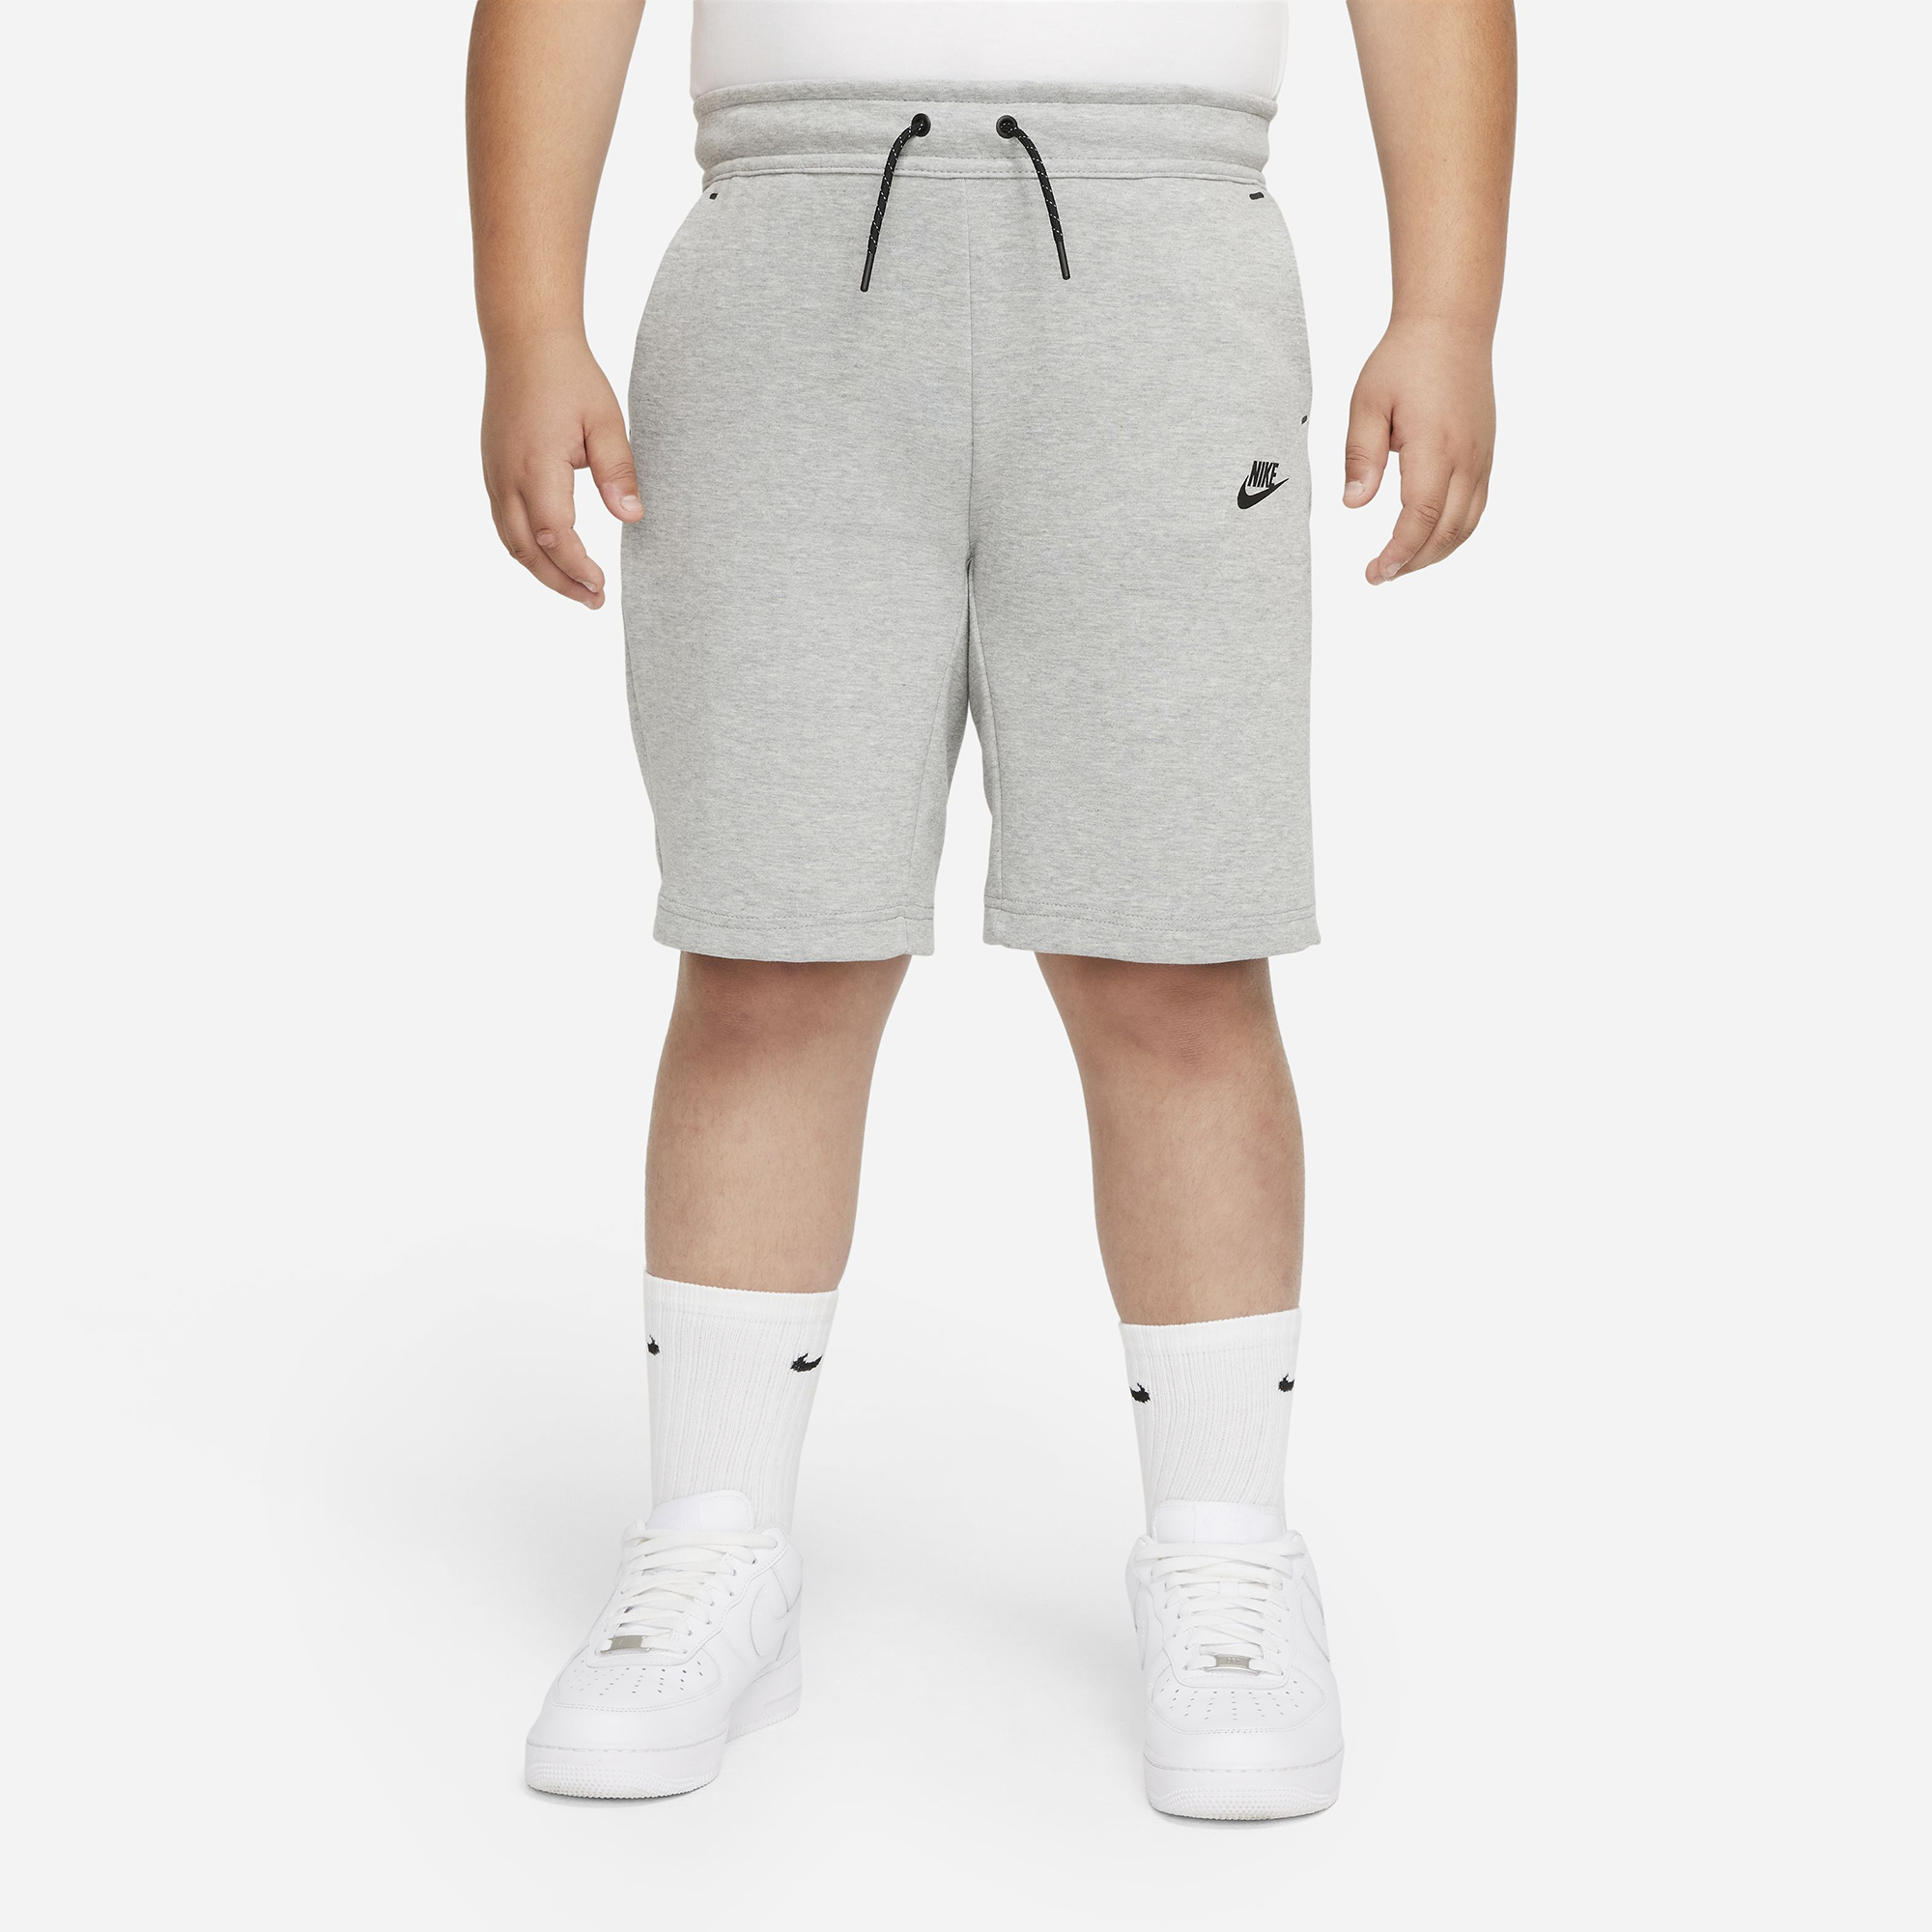 Nike Tech Fleece Shorts Extended Sizes | Champs Sports